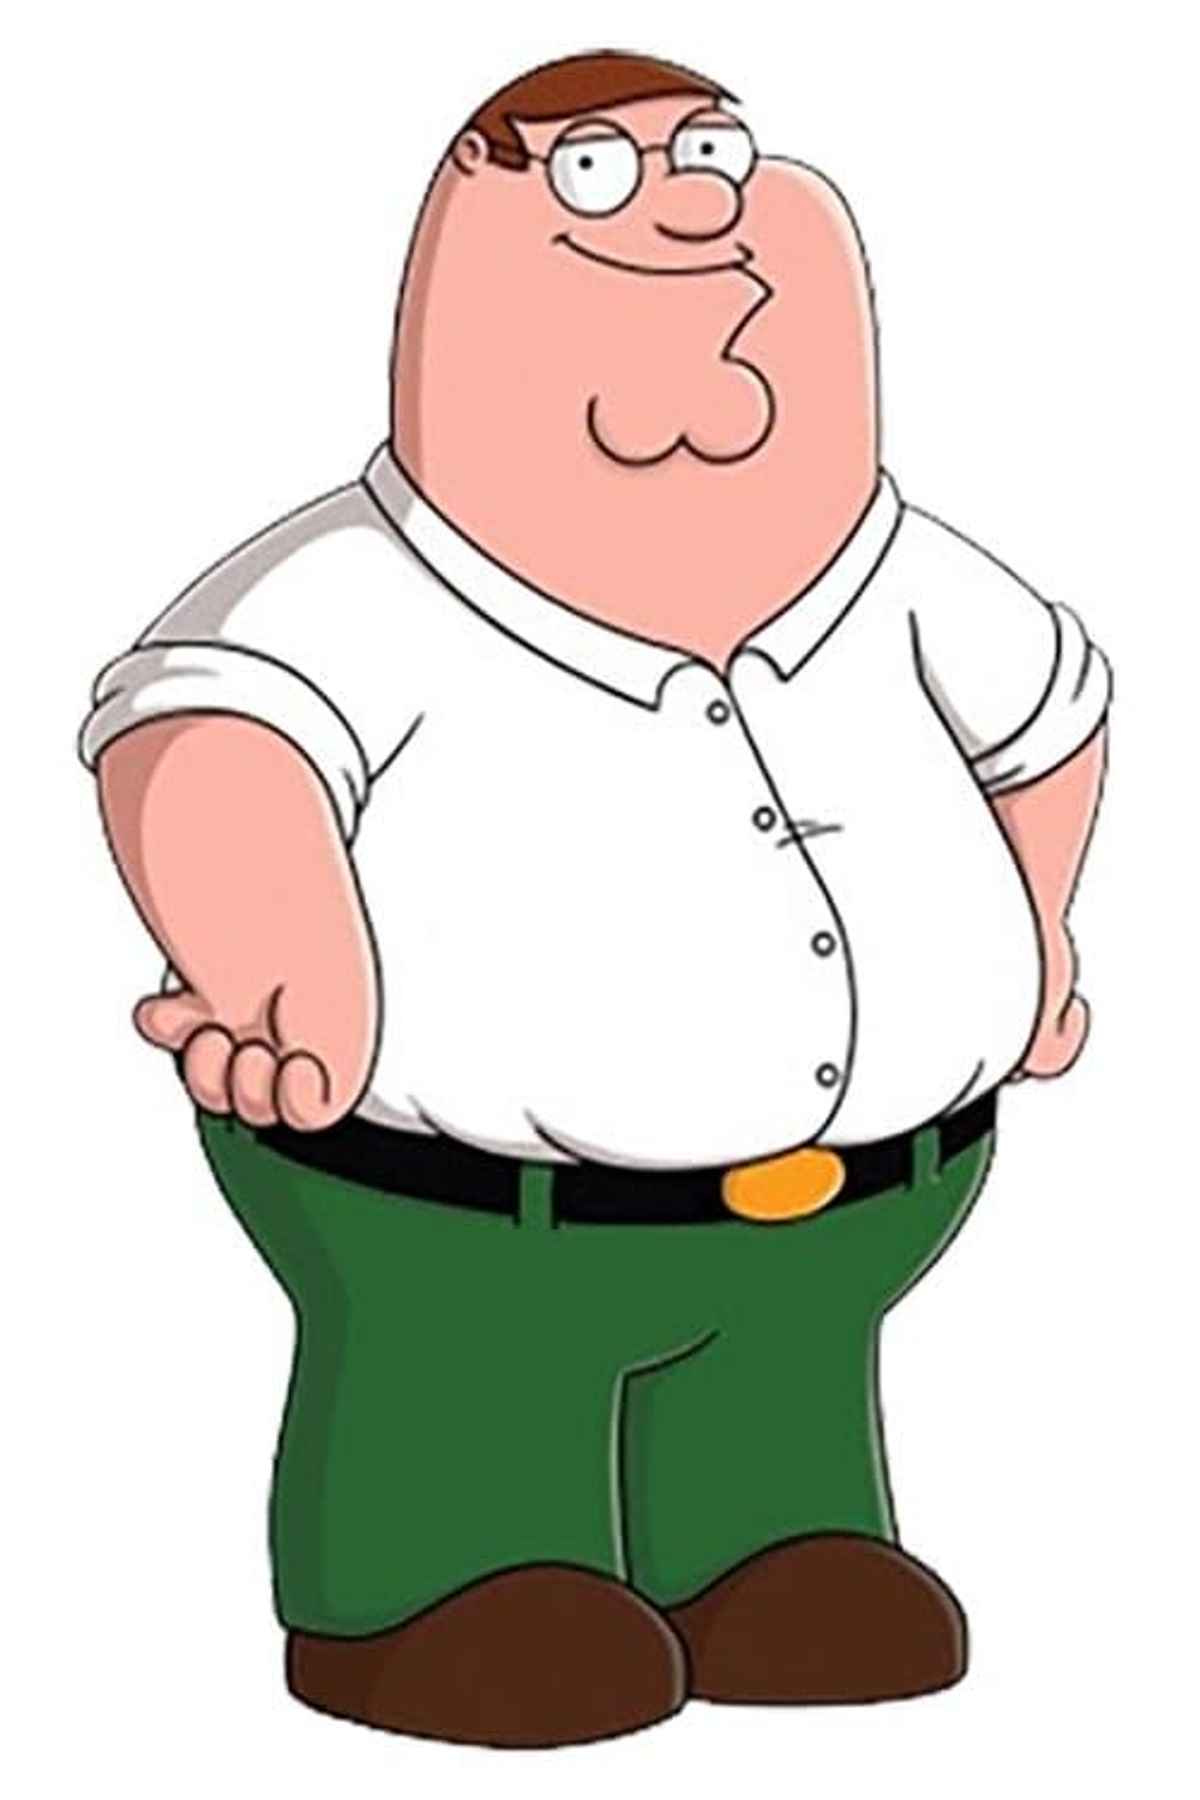 Untitled Family Guy live-action/animated movie